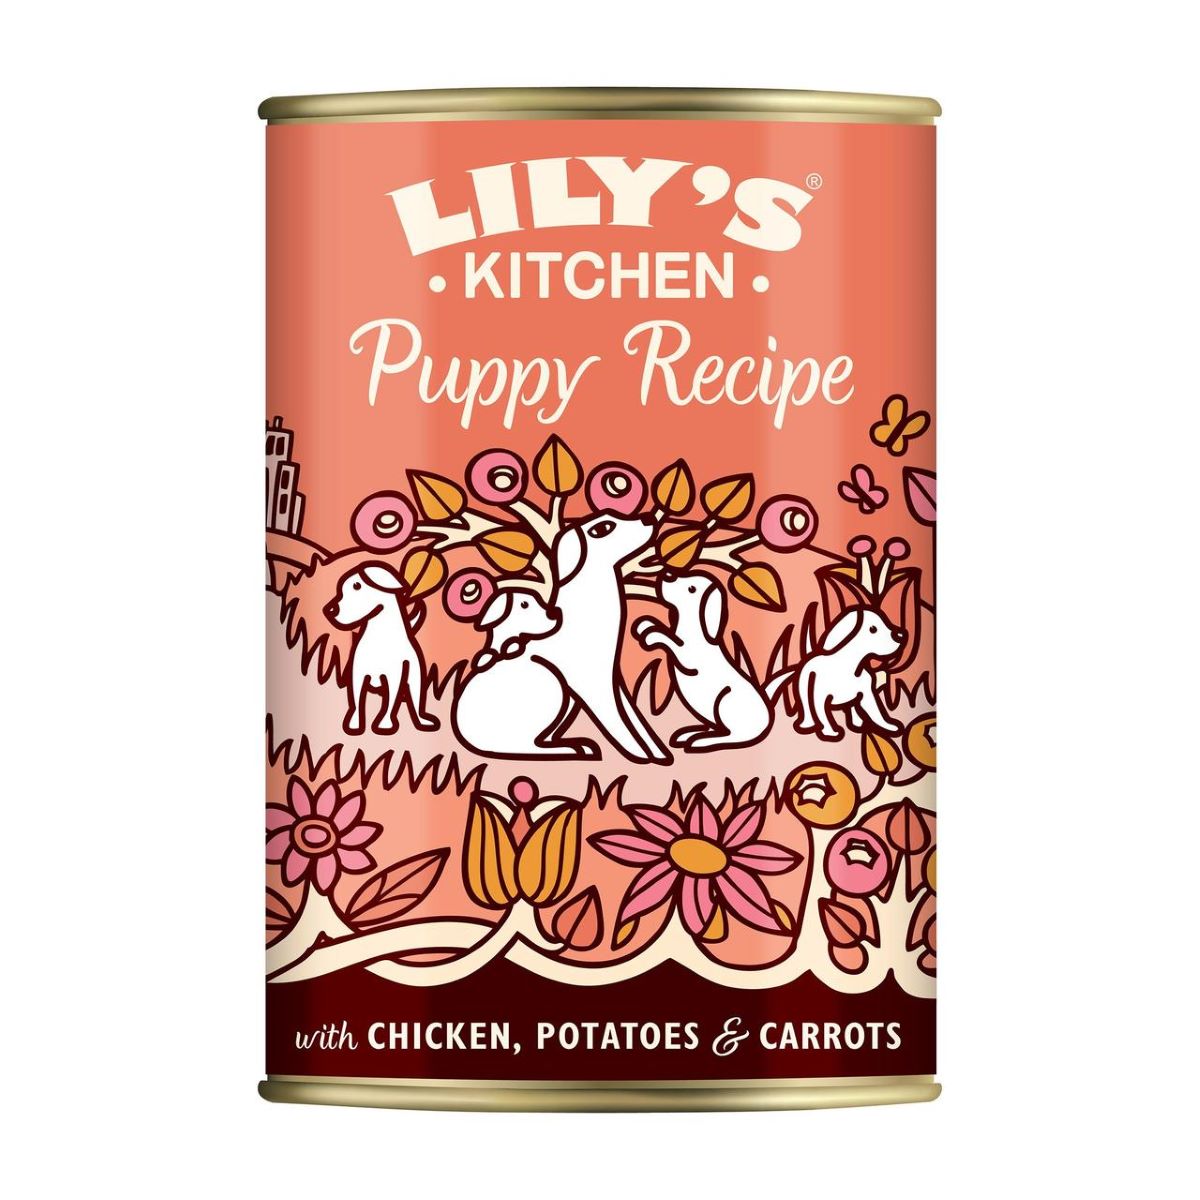 Lily's Kitchen Puppy Recipe with Chicken, Potatoes & Carrots 400g